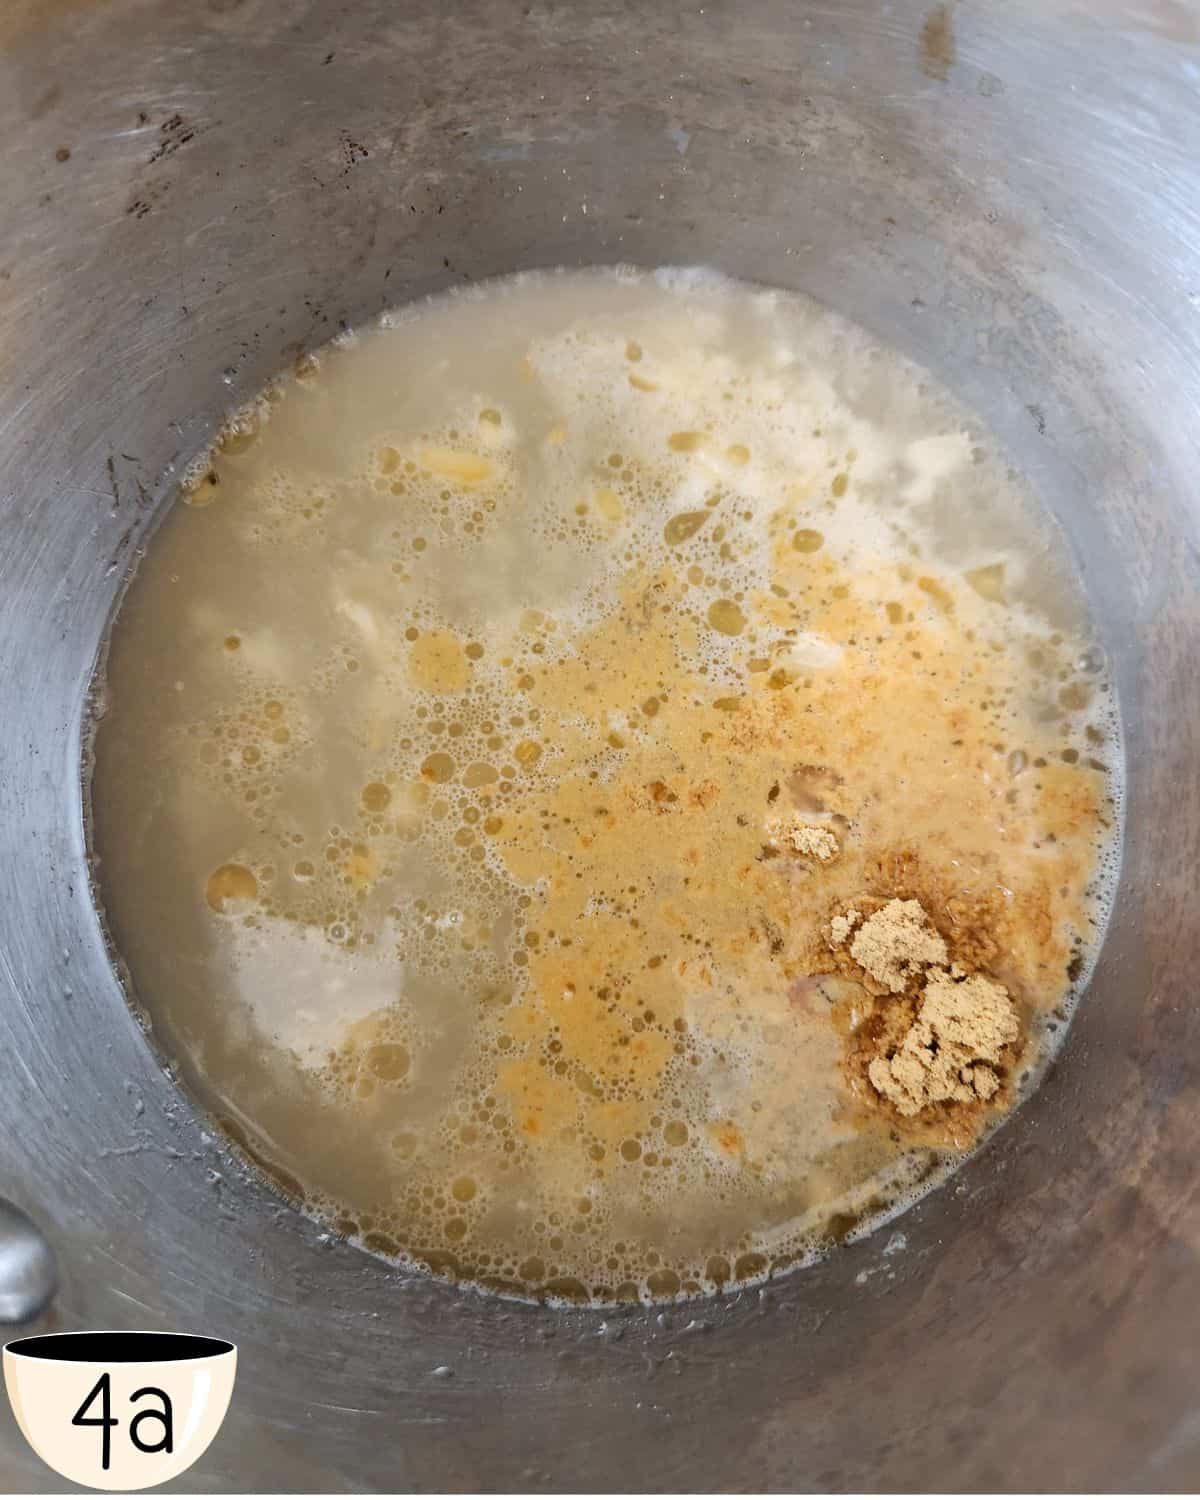 Image of a bowl with Chinese General Tso sauce being mixed together.